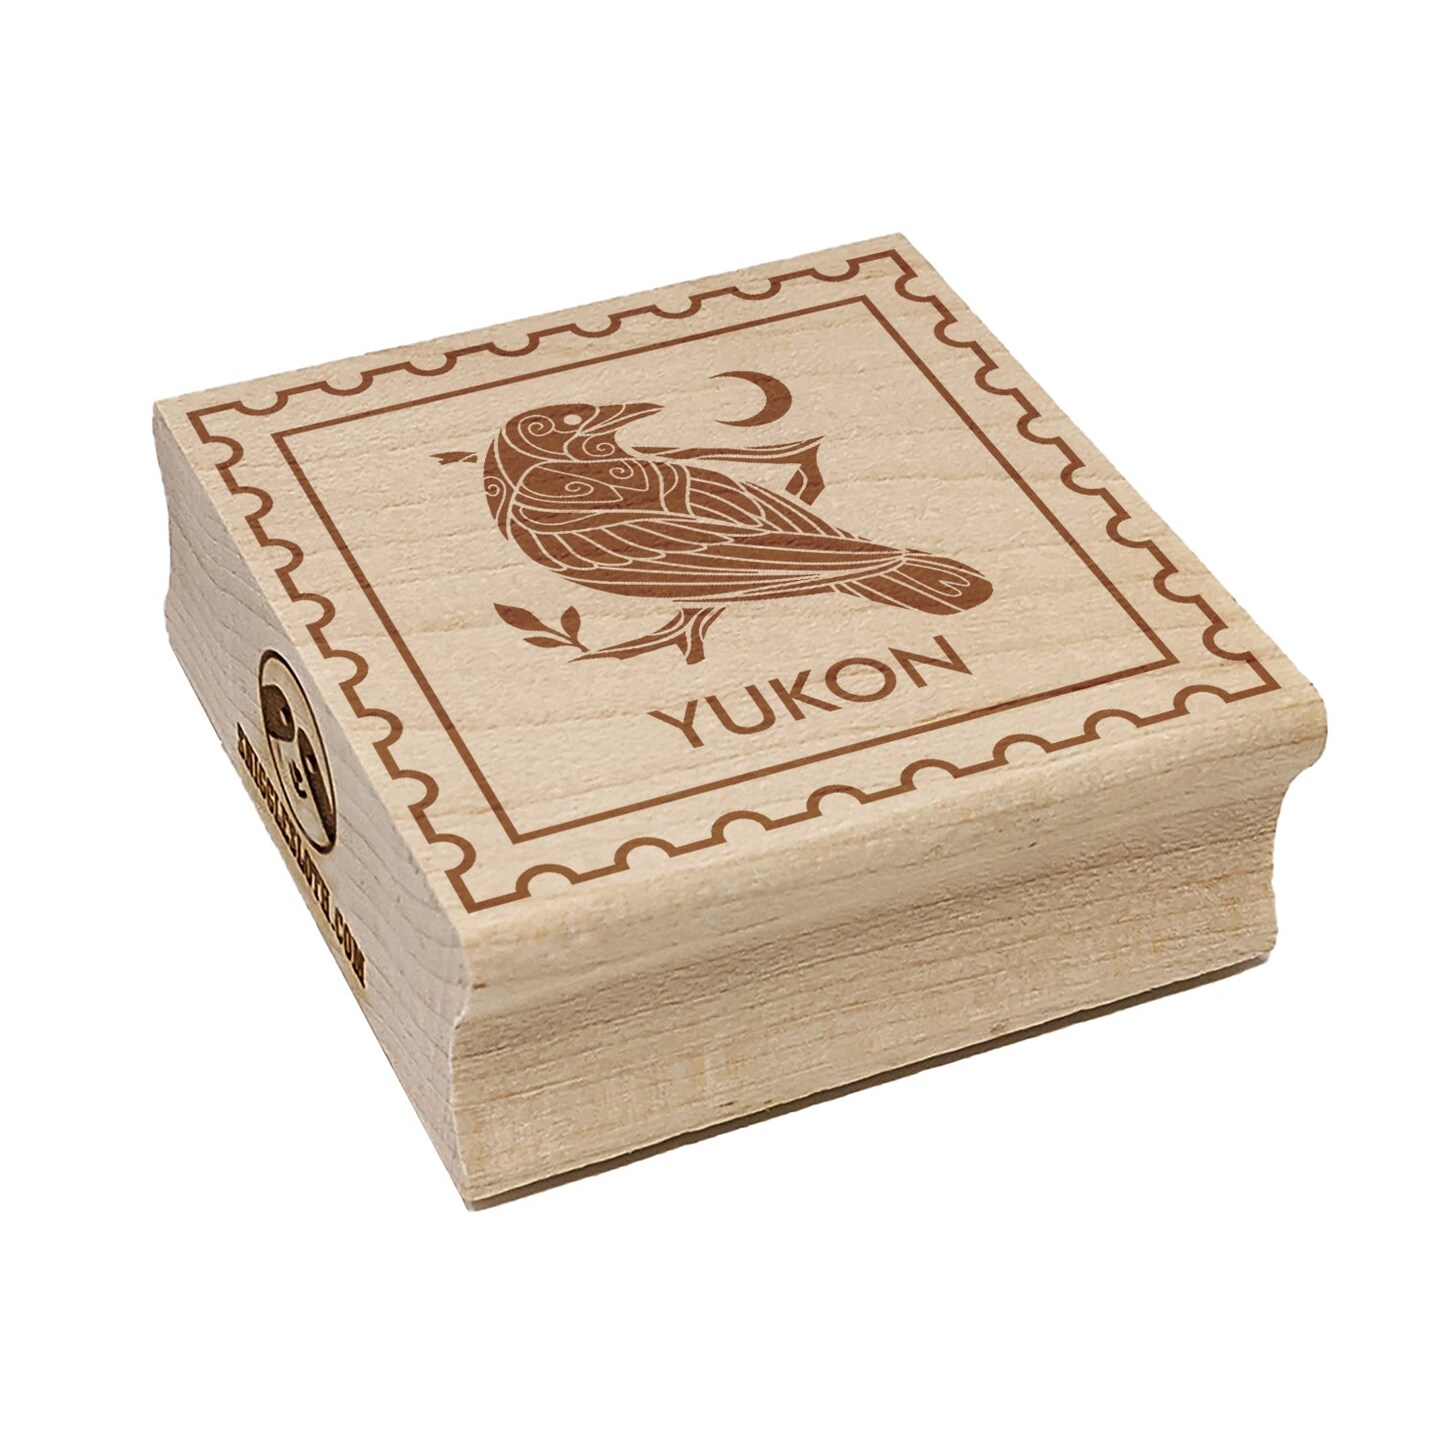 Yukon Canada Destination Travel Square Rubber Stamp for Stamping Crafting